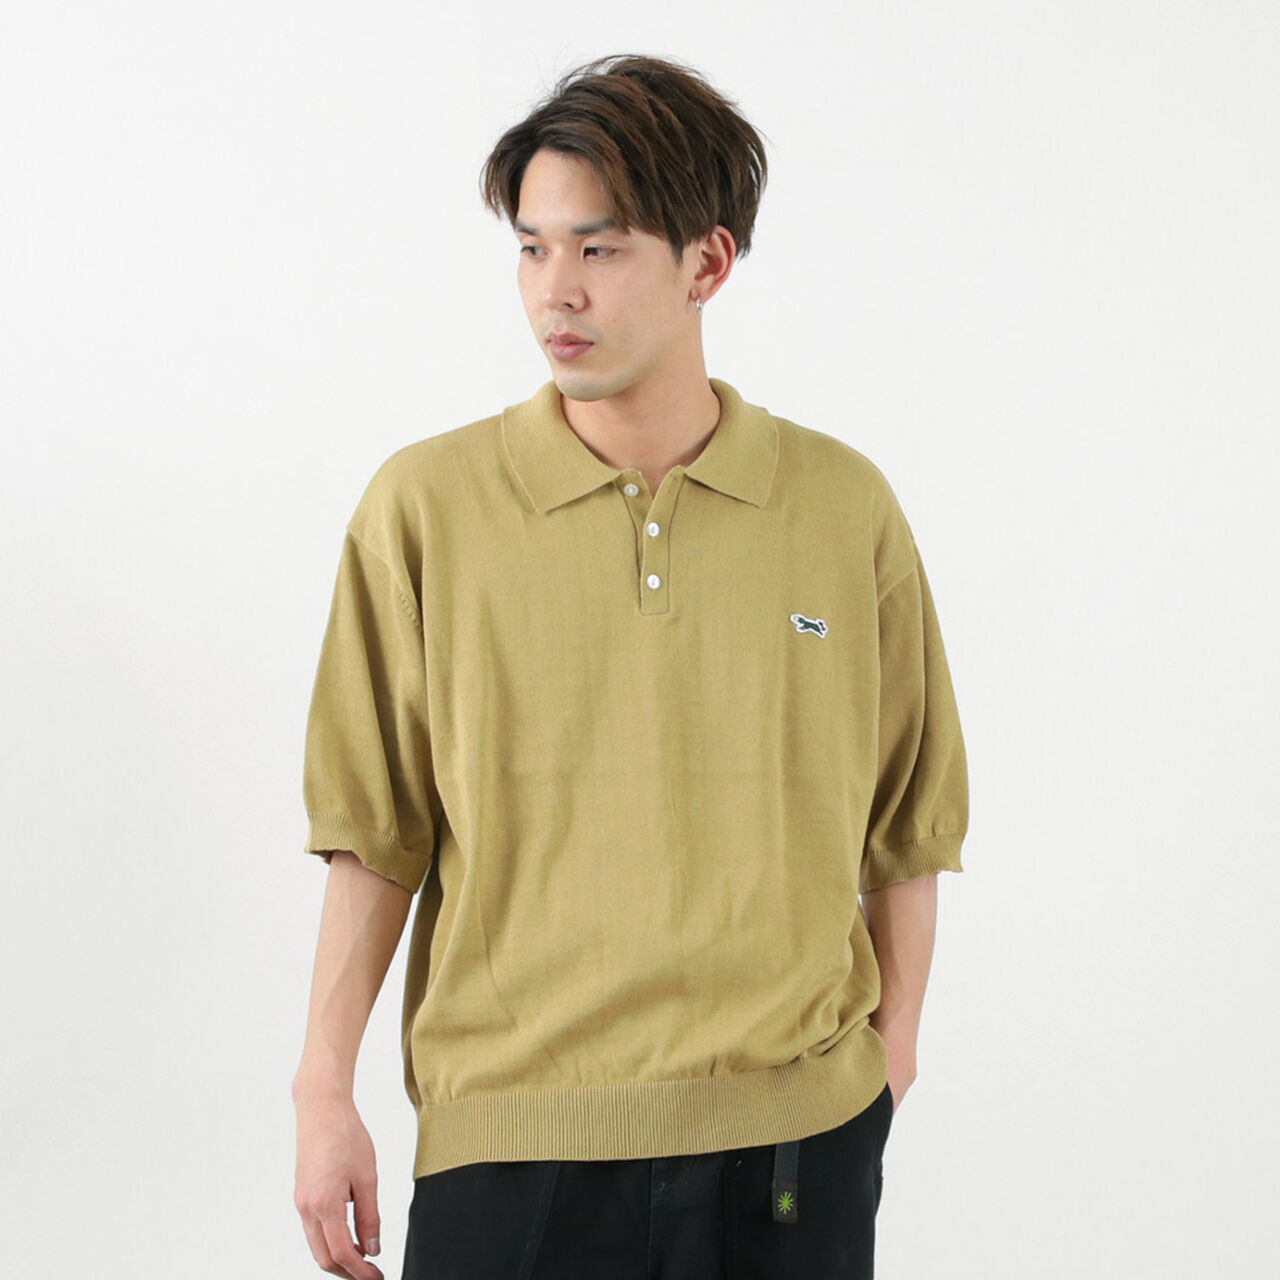 Fox Knit polo shirt,Beige, large image number 0